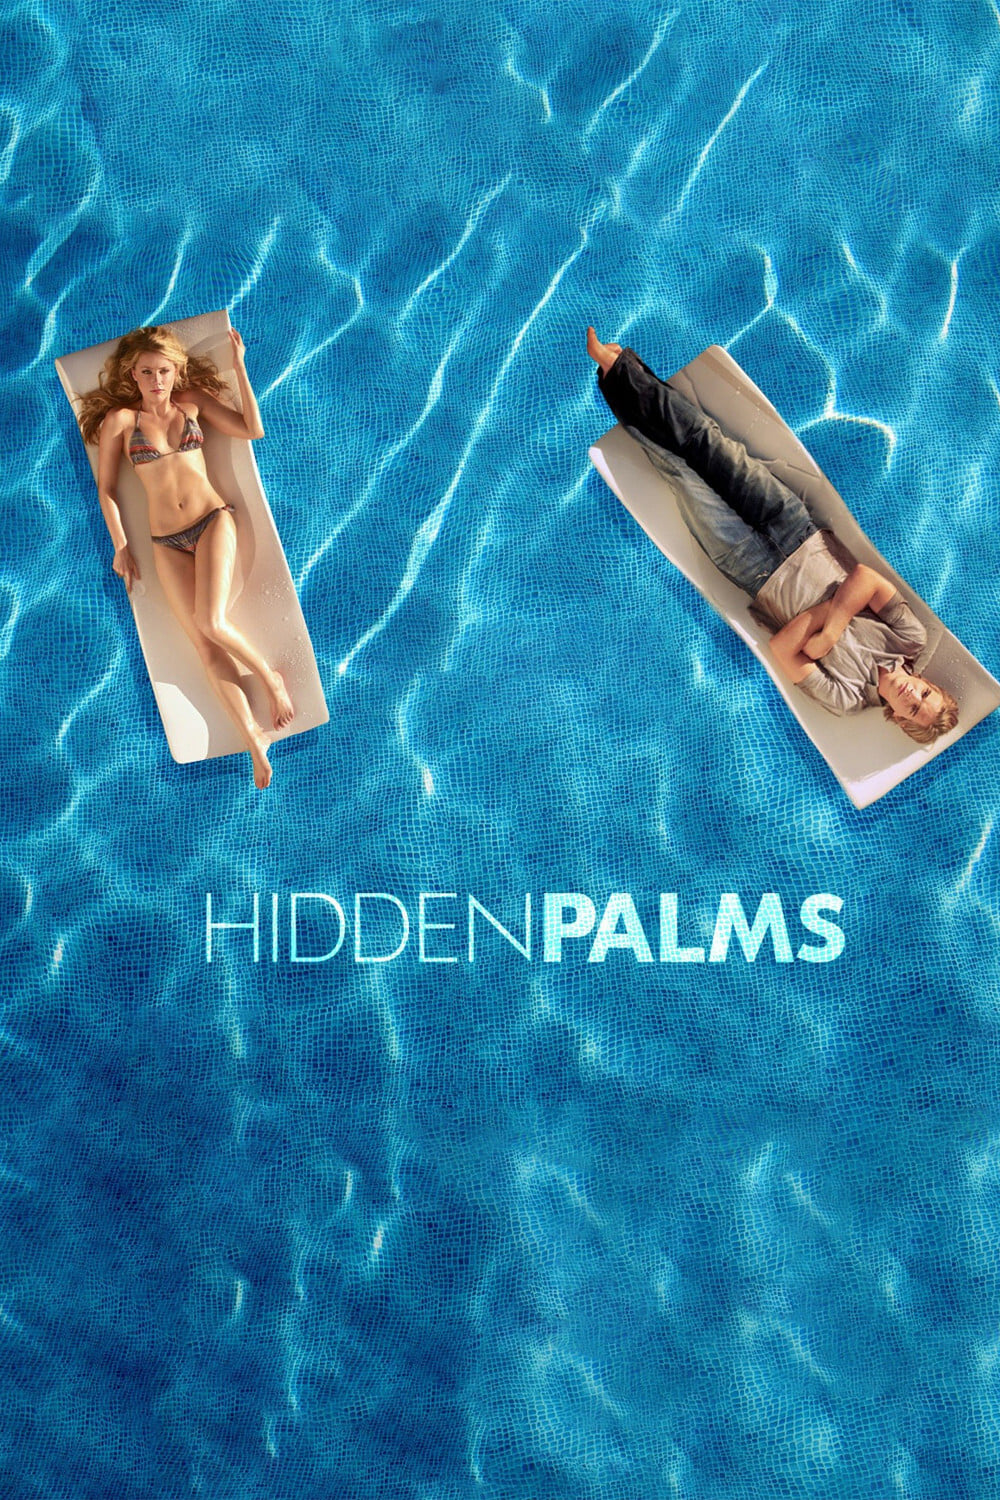 Hidden Palms TV Shows About Recovering Addict